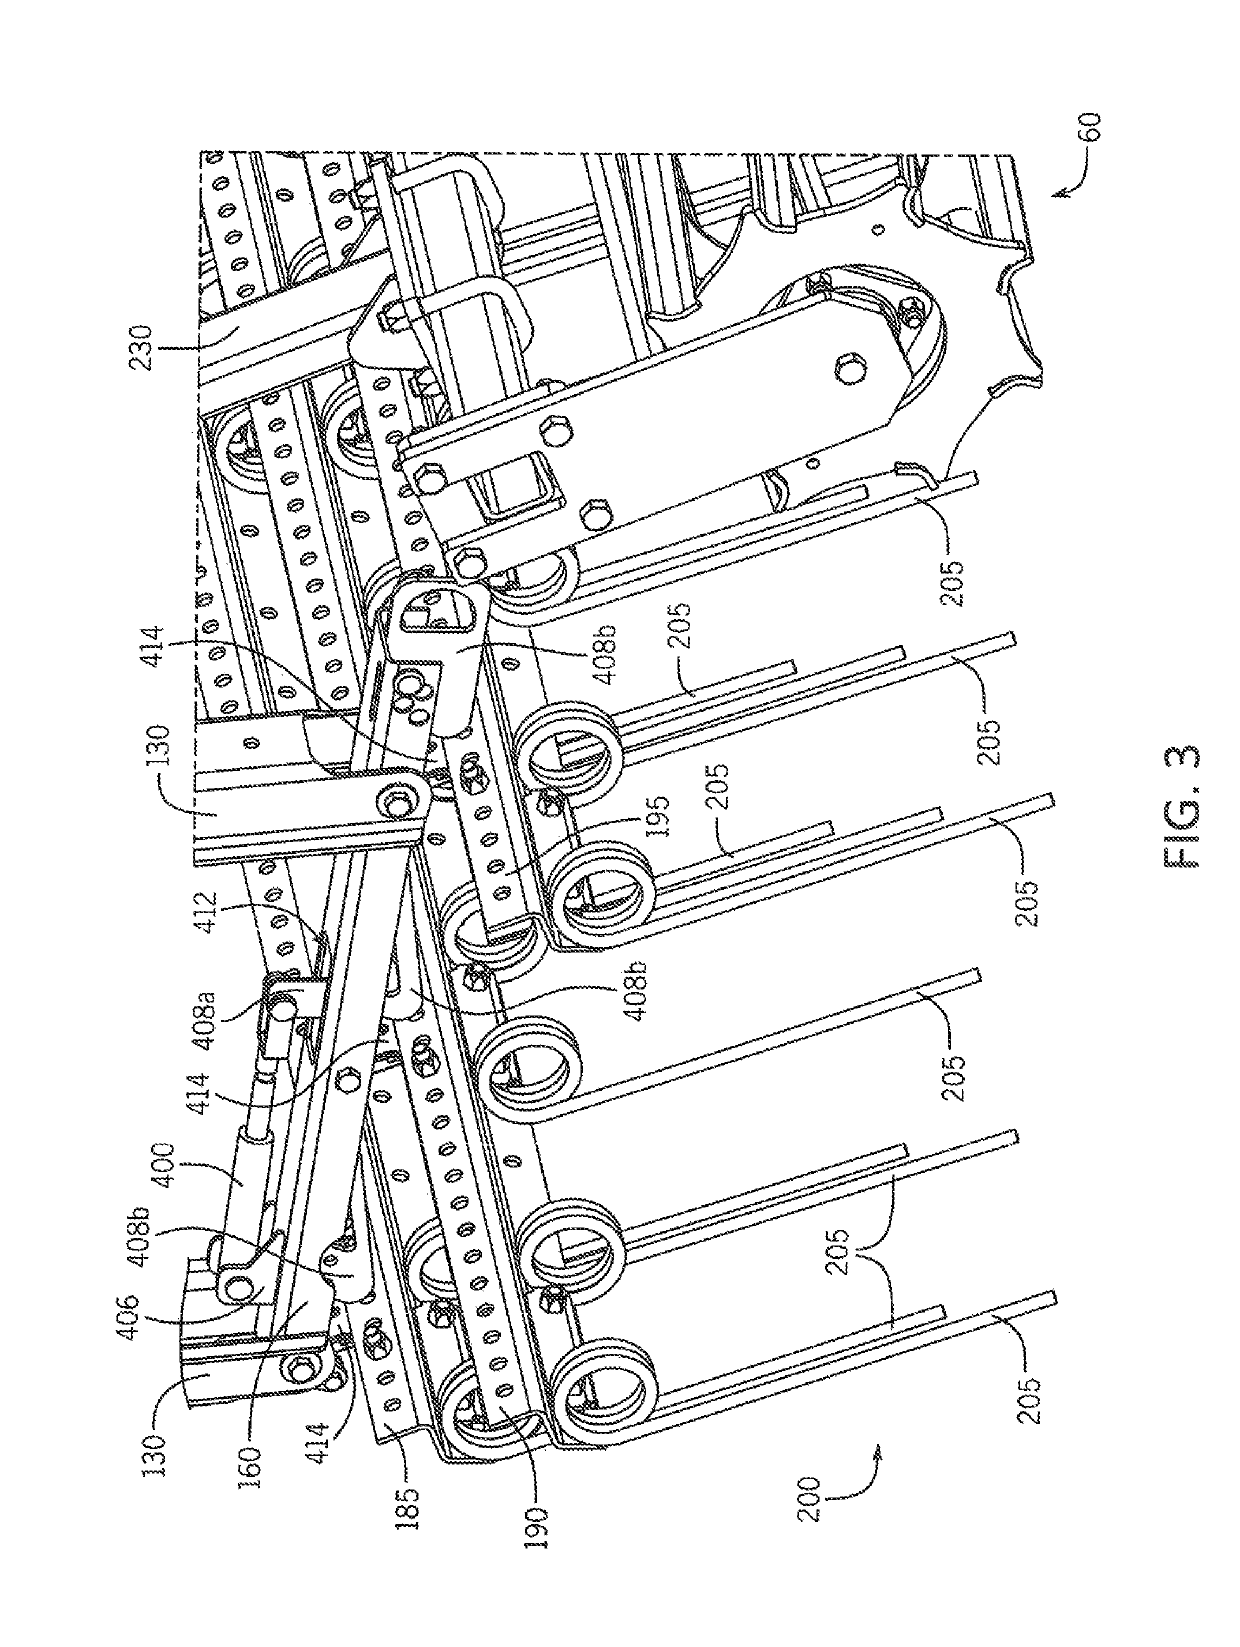 Electronic sensor assembly for monitoring smoothing tools of a harrow